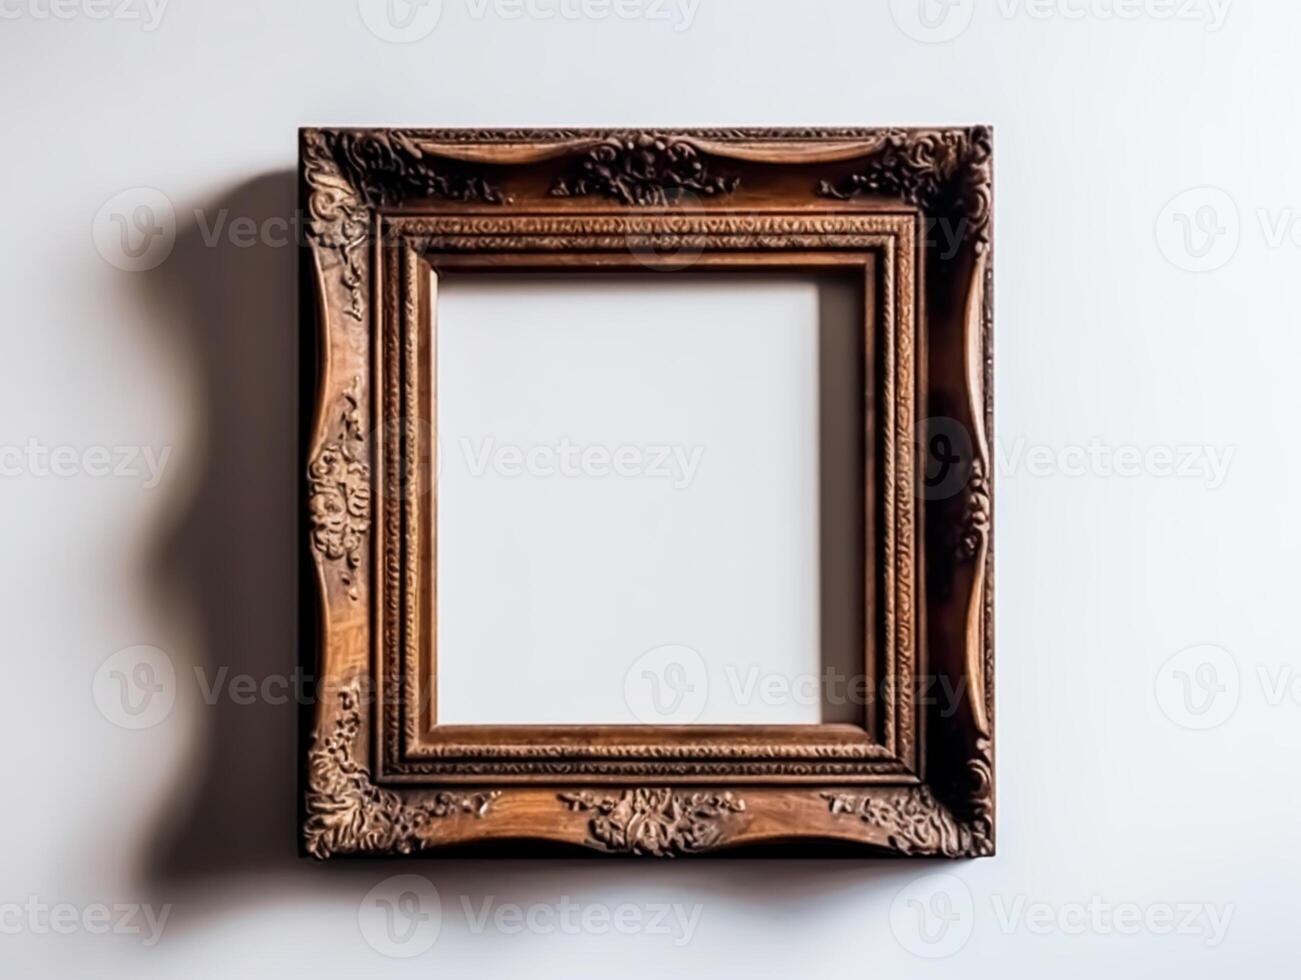 Antique empty wooden square frame on a white wall. photo